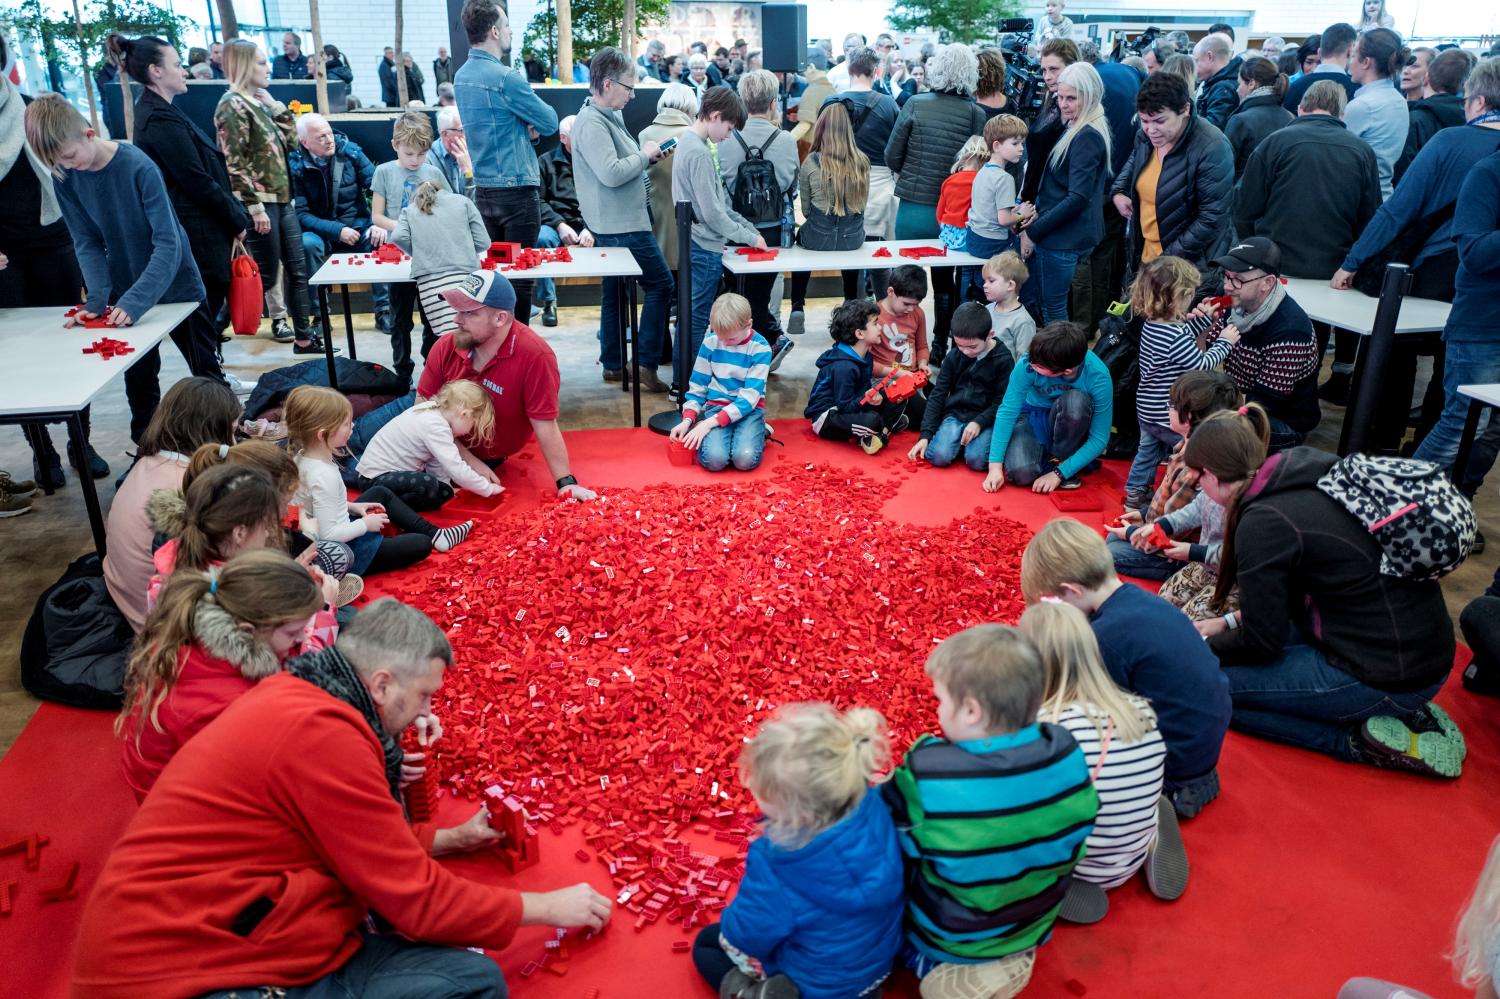 Adults and children play with Lego bricks during the celebrations of the 60th anniversary of the Lego brick, at Lego House in Billund, Denmark January 28, 2018. Scanpix Denmark/Michael Drost-Hansen via REUTERS ATTENTION EDITORS - THIS IMAGE WAS PROVIDED BY A THIRD PARTY. DENMARK OUT. NO COMMERCIAL OR EDITORIAL SALES IN DENMARK. - RC142CA74E00